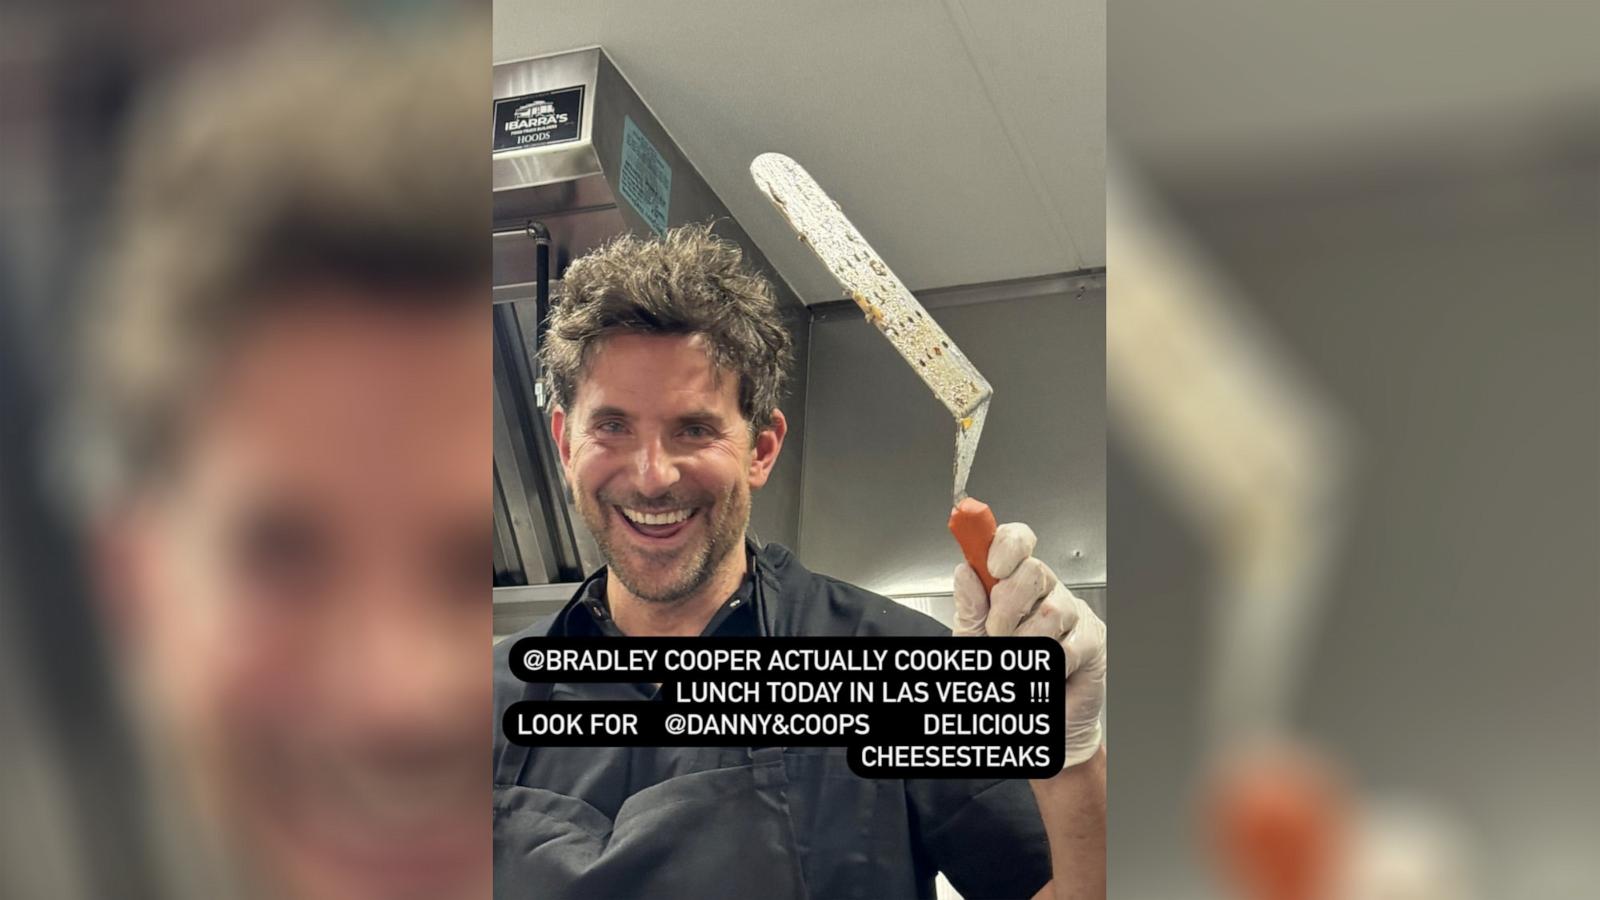 PHOTO: Martha Stewart snapped a photo of Bradley Cooper serving cheesesteaks for a QVC event in Las Vegas posted on her Instagram stories.